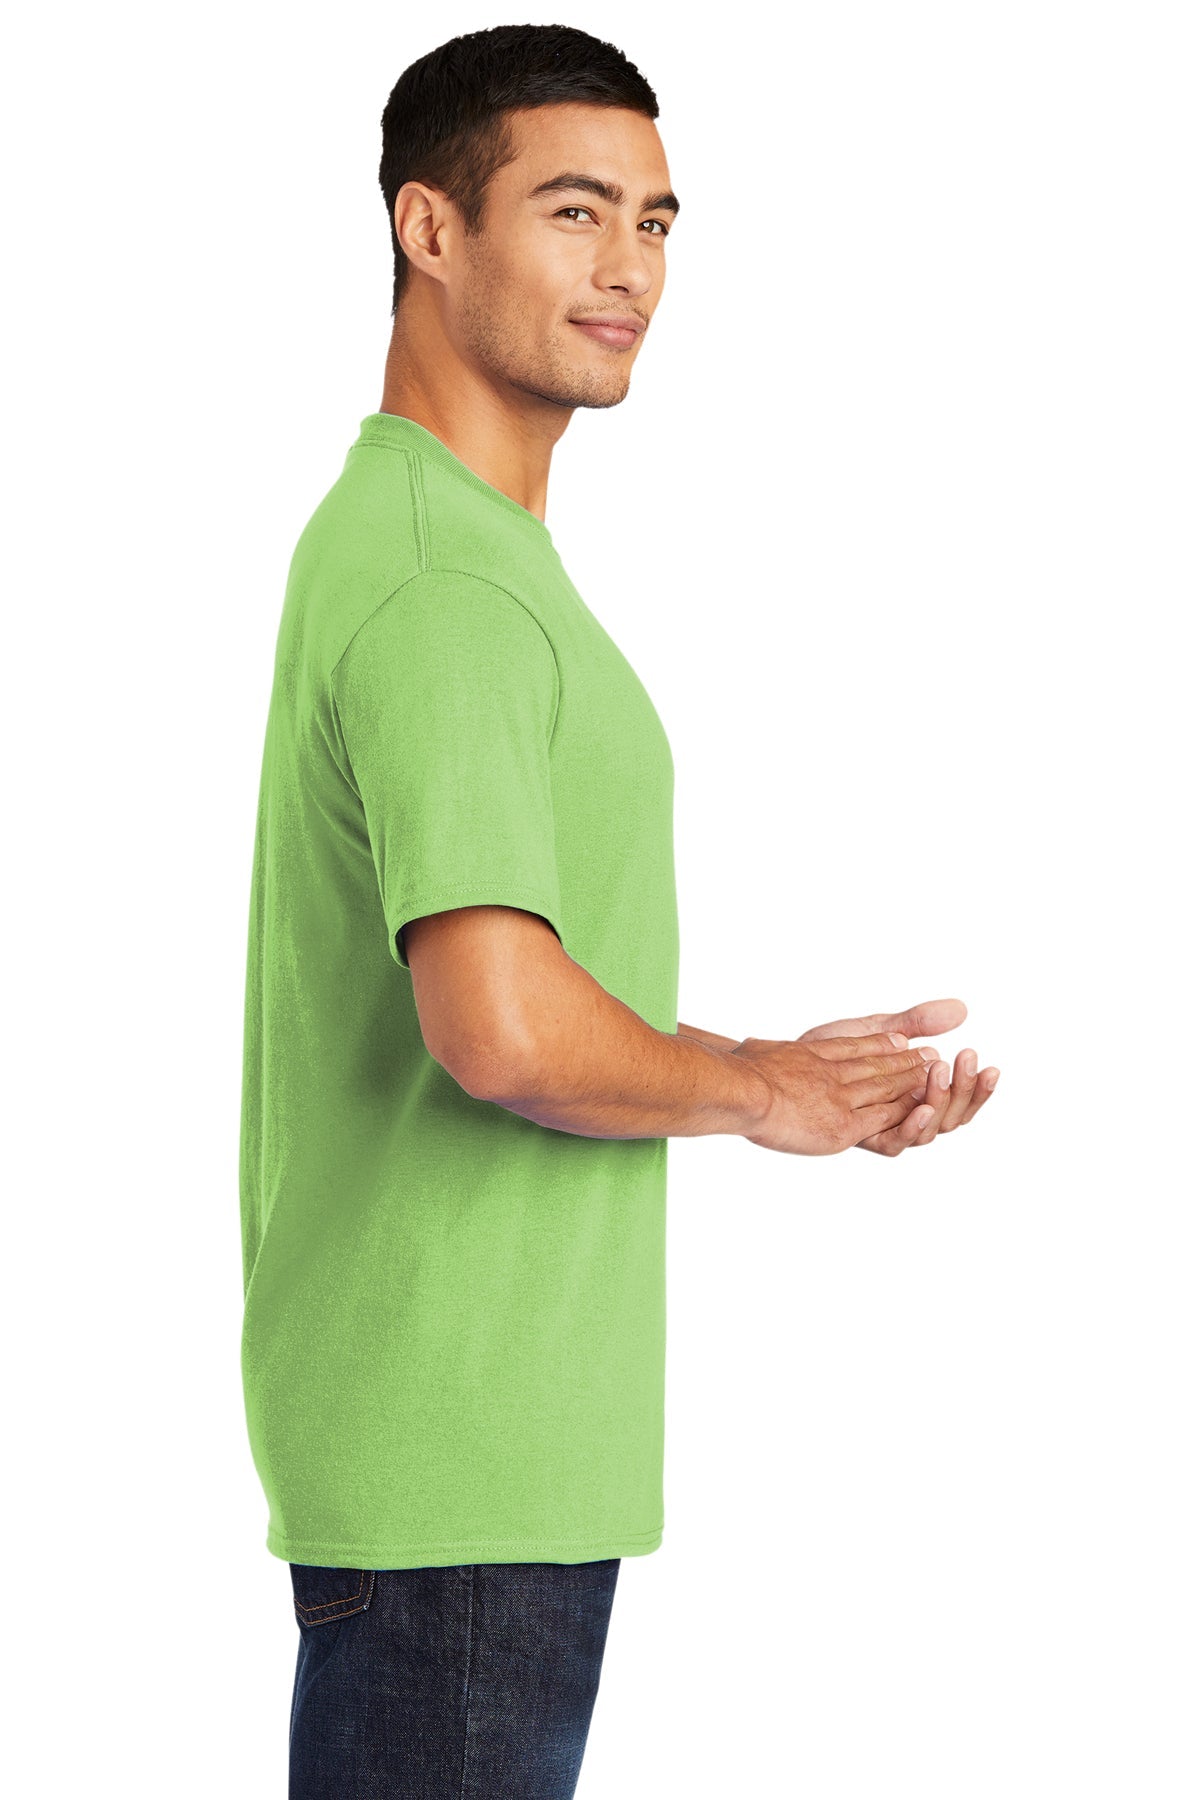 Port & Company Tall Core Blend Branded Tee's, Lime